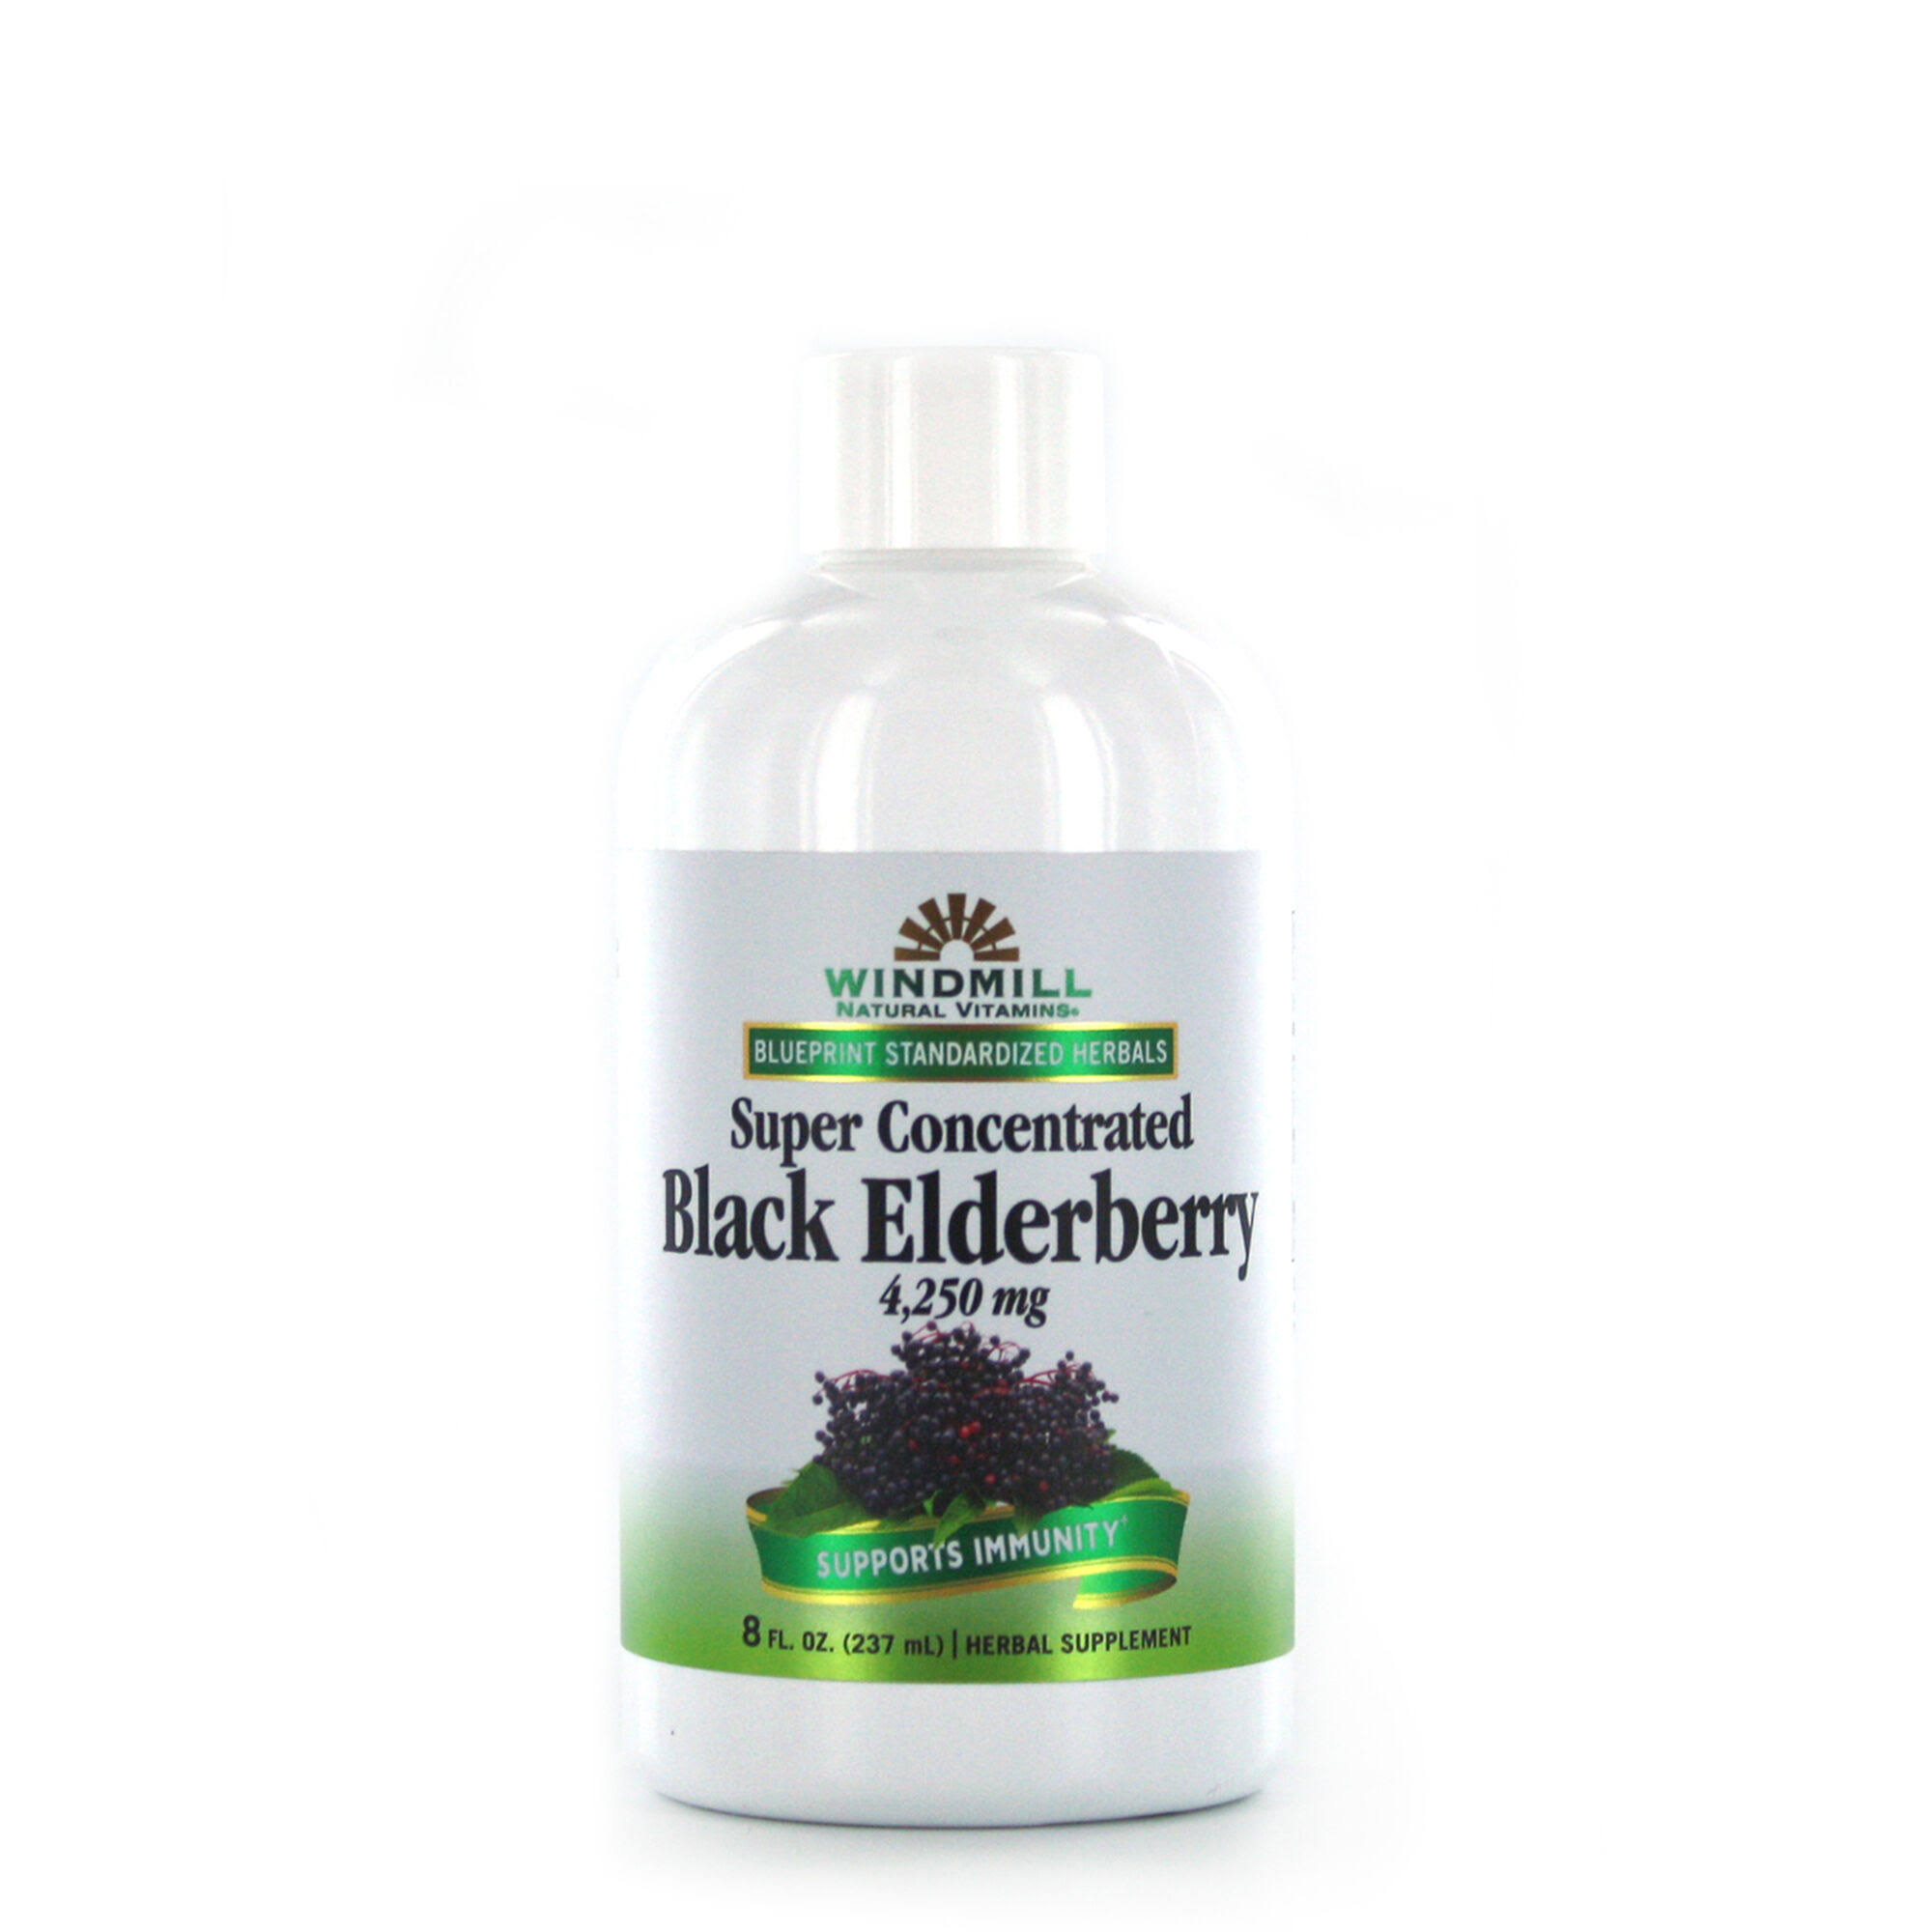 Super Concentrated Black Elderberry (Supports Immunity)8OZ